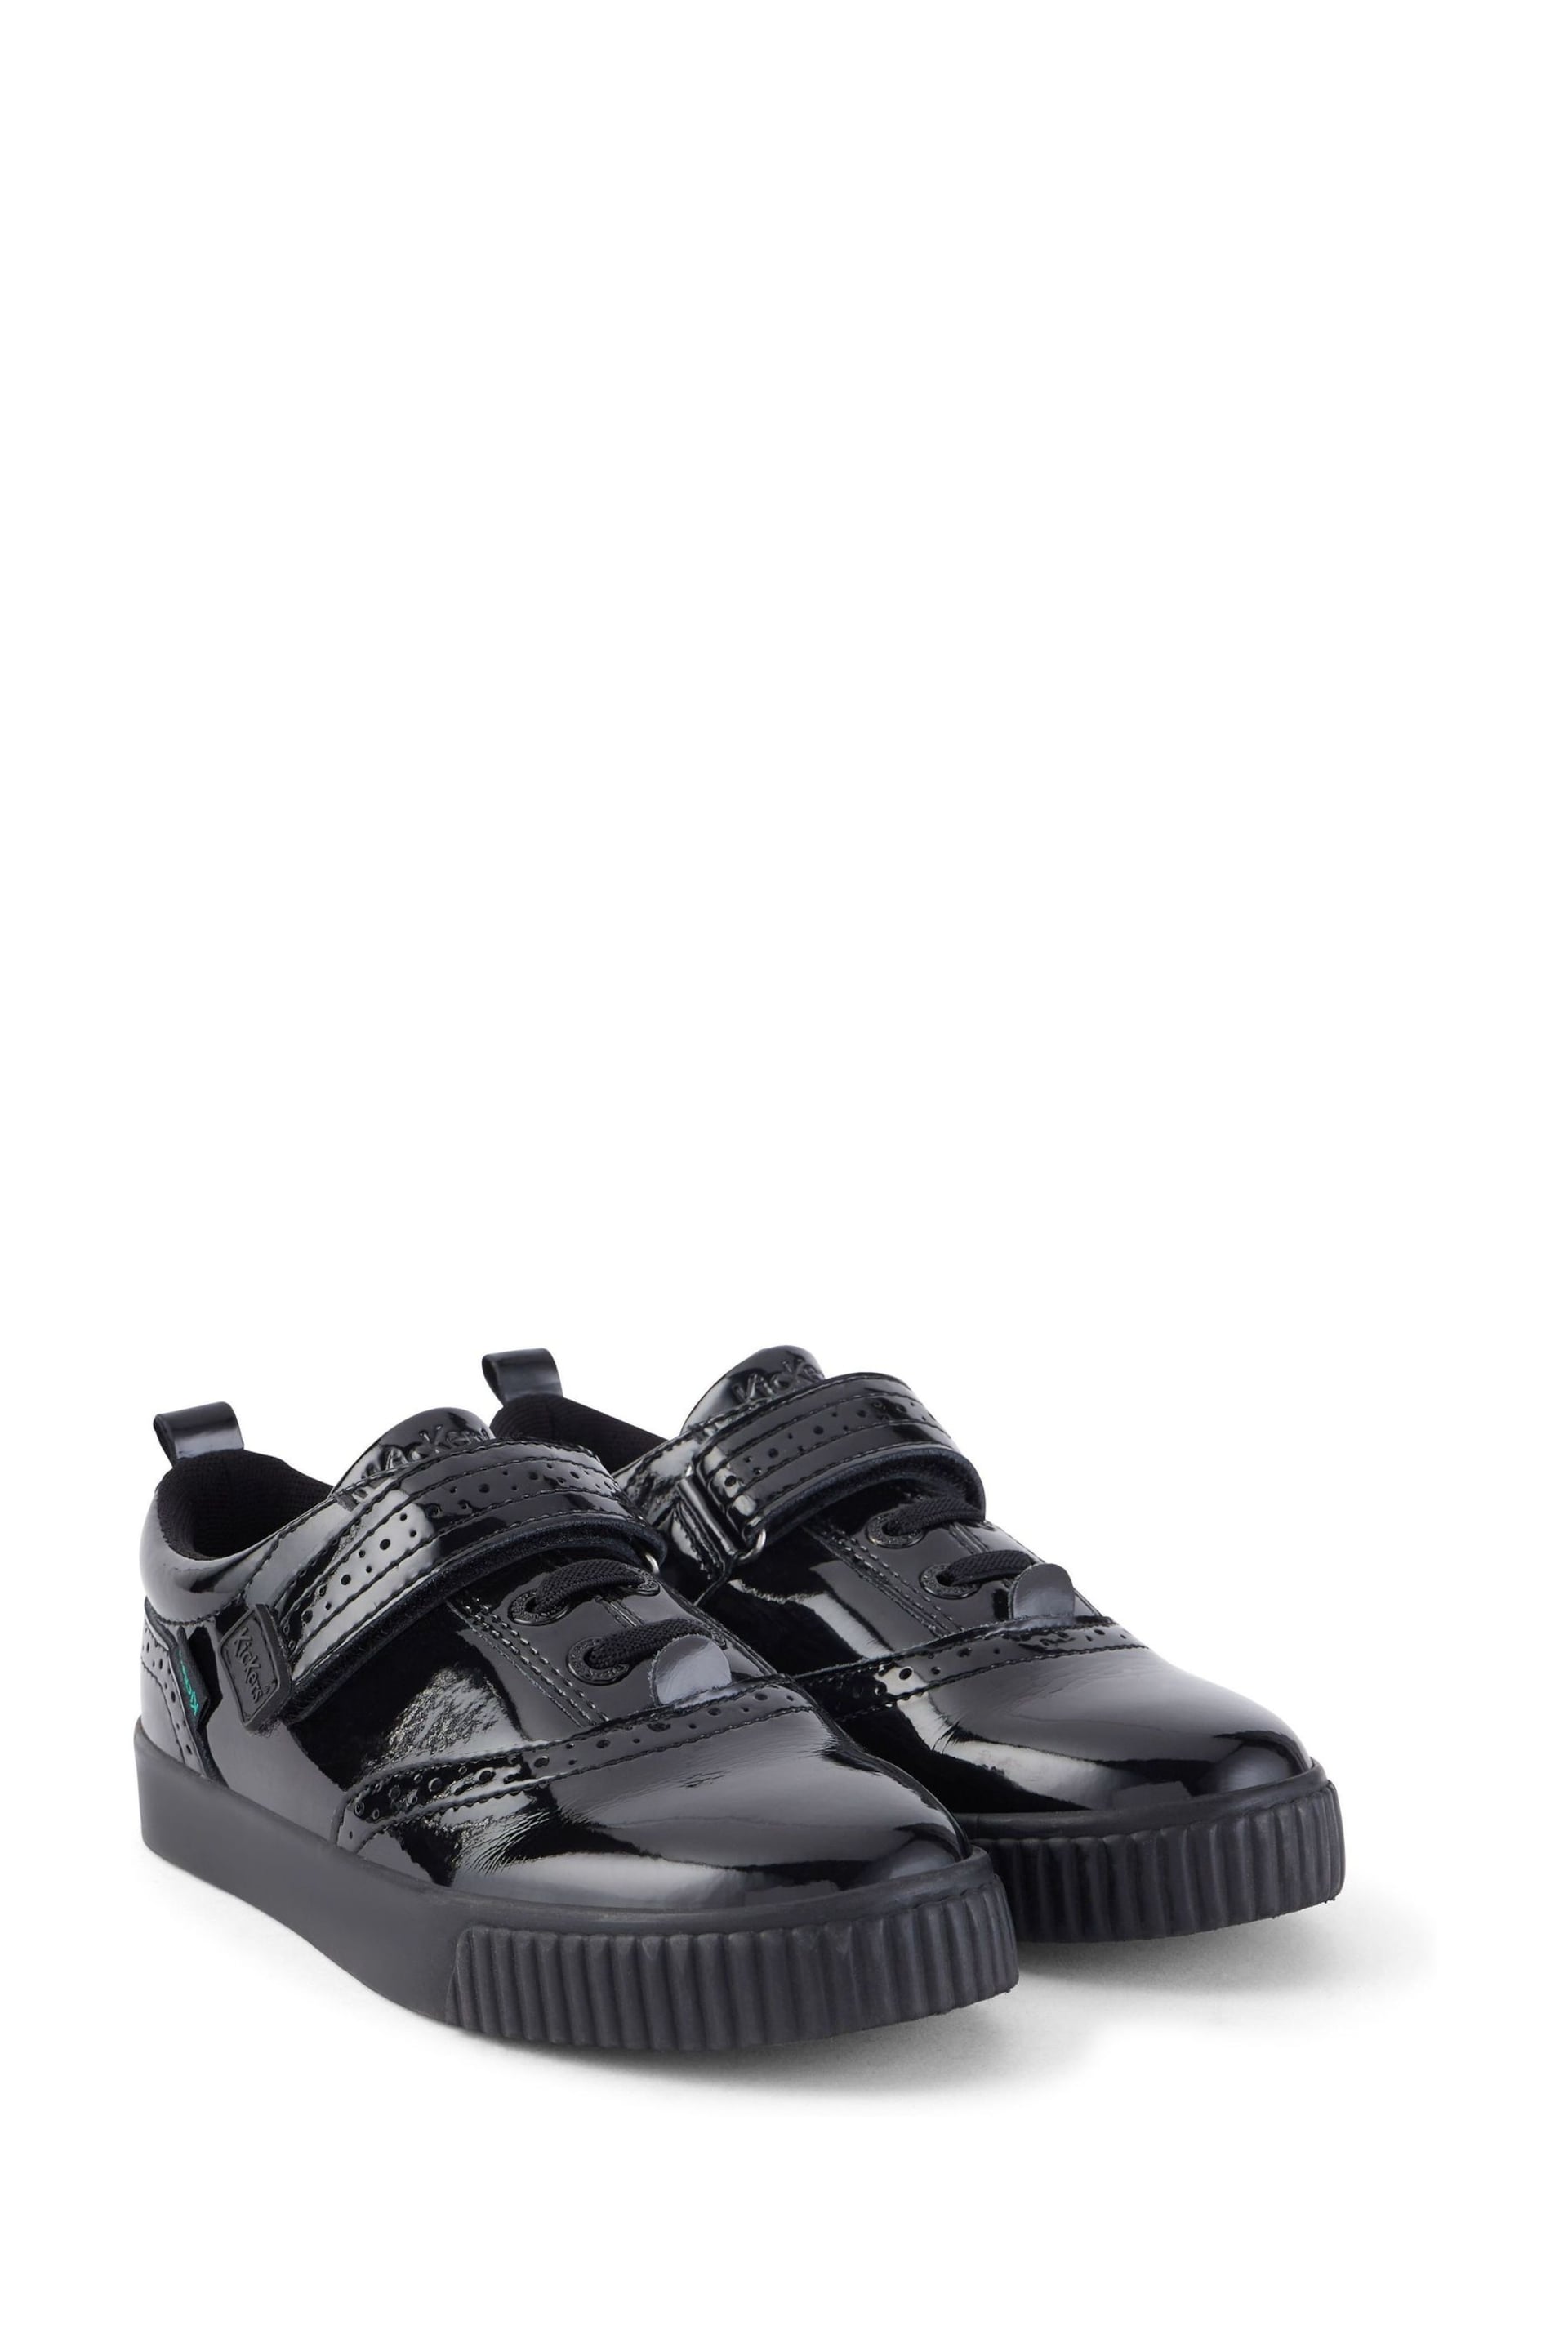 Kickers Junior Tovni Brogue Patent Leather Shoes - Image 3 of 6